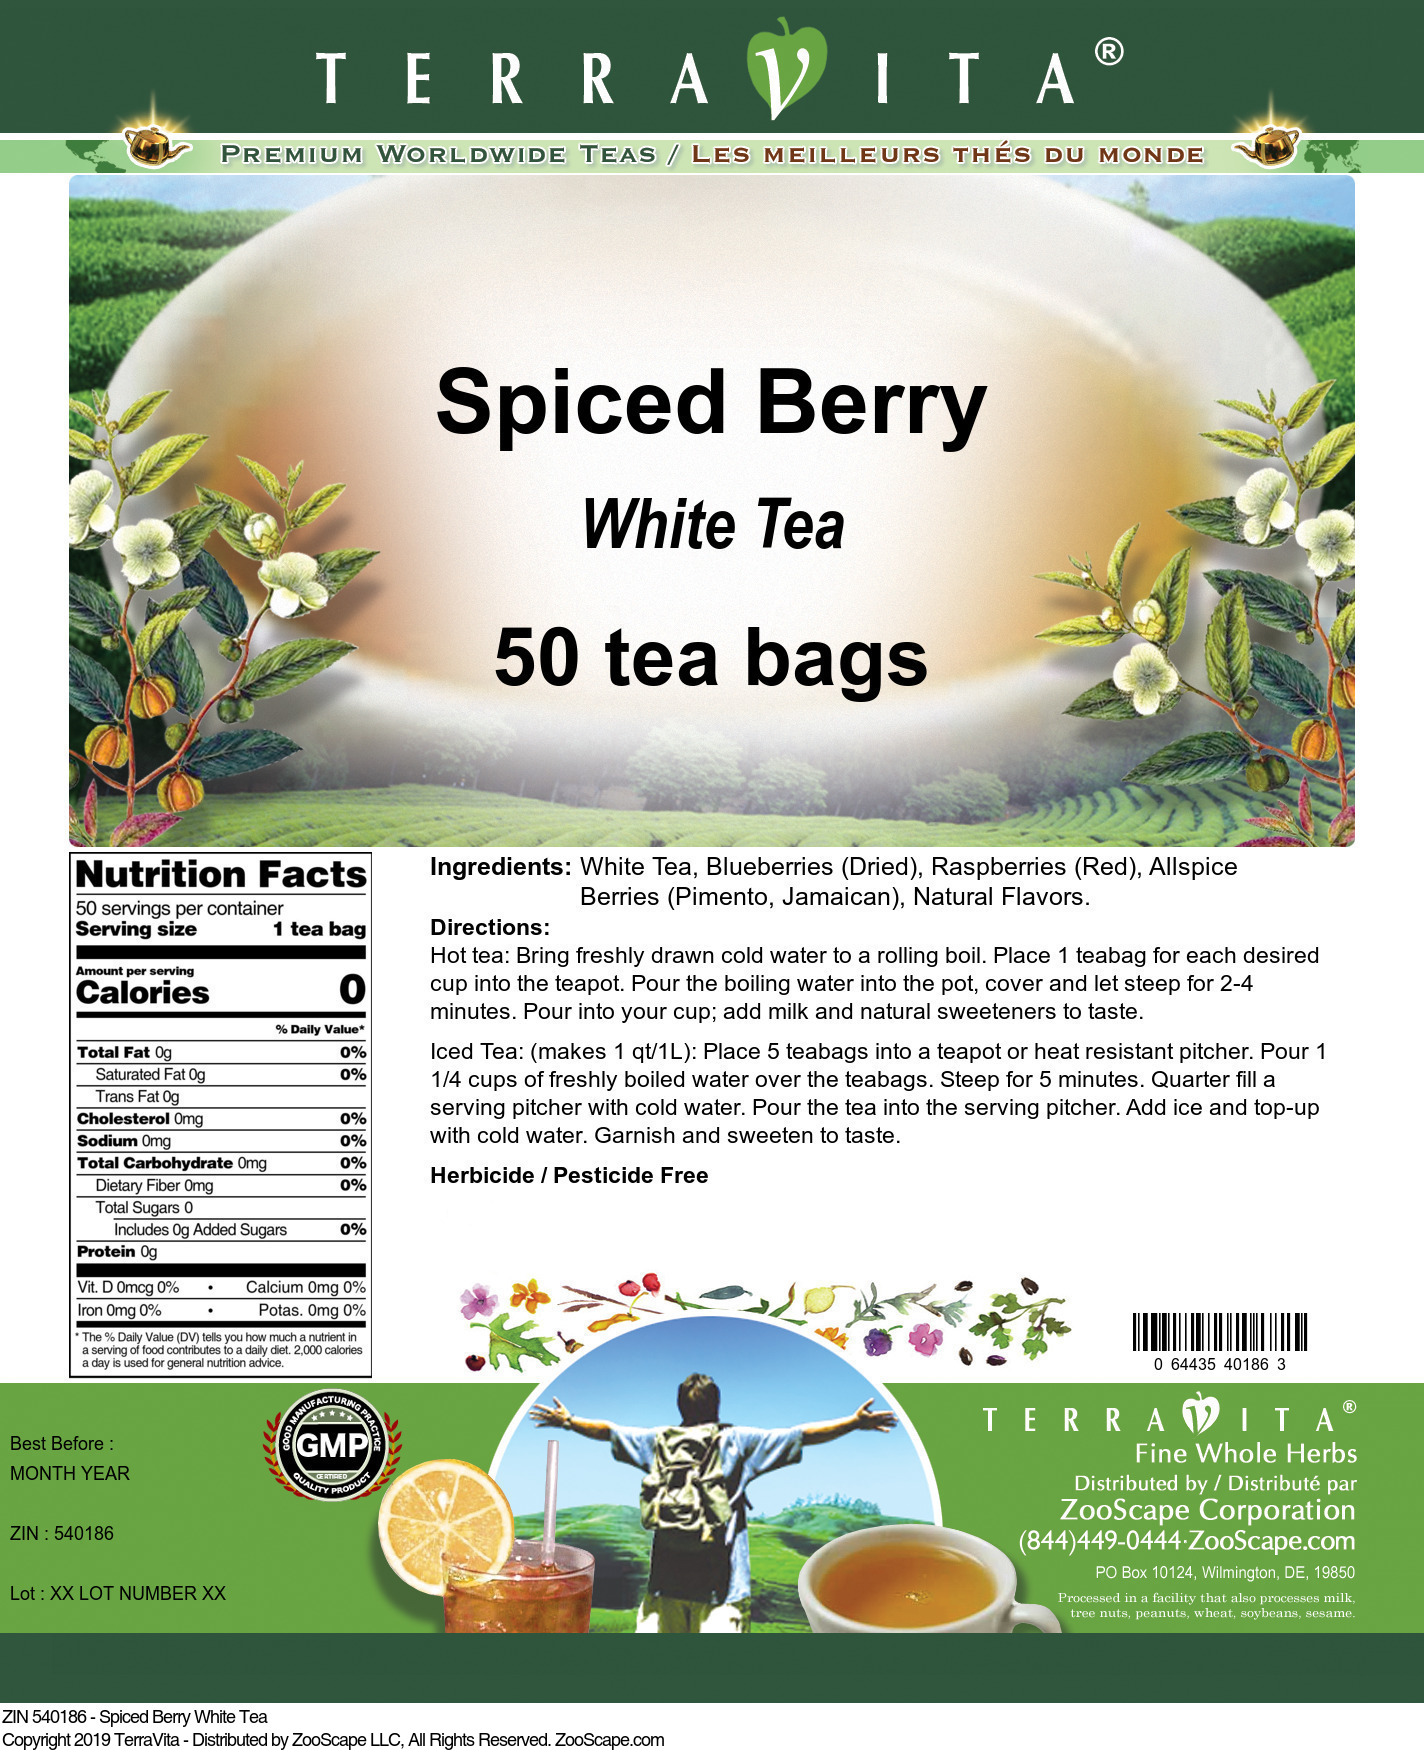 Spiced Berry White Tea - Label